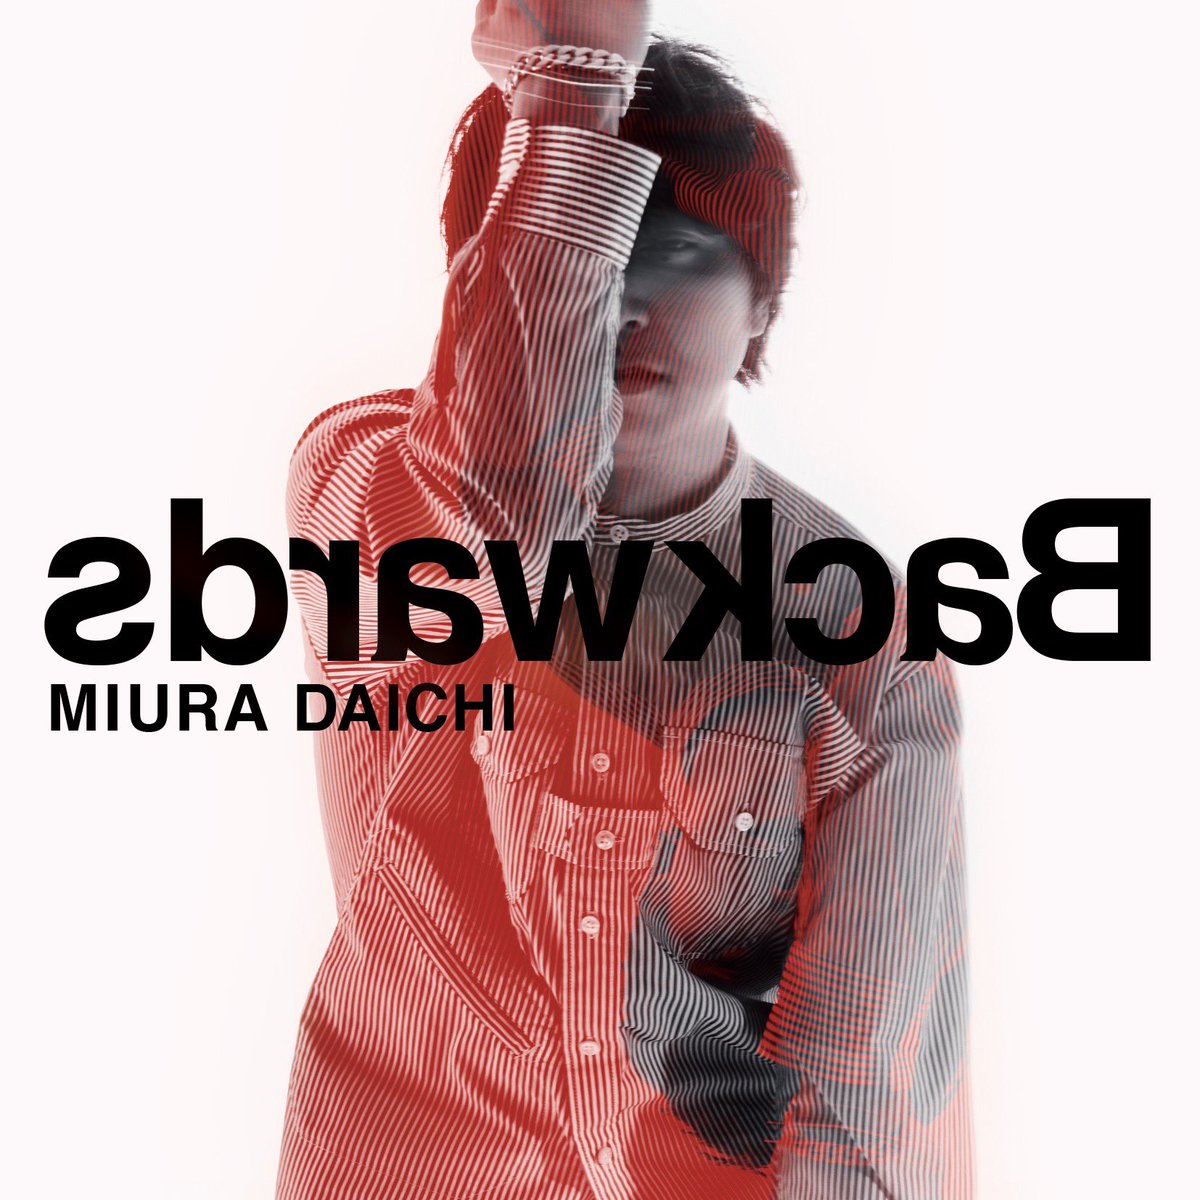 Cover for『Daichi Miura - Backwards』from the release『Backwards』